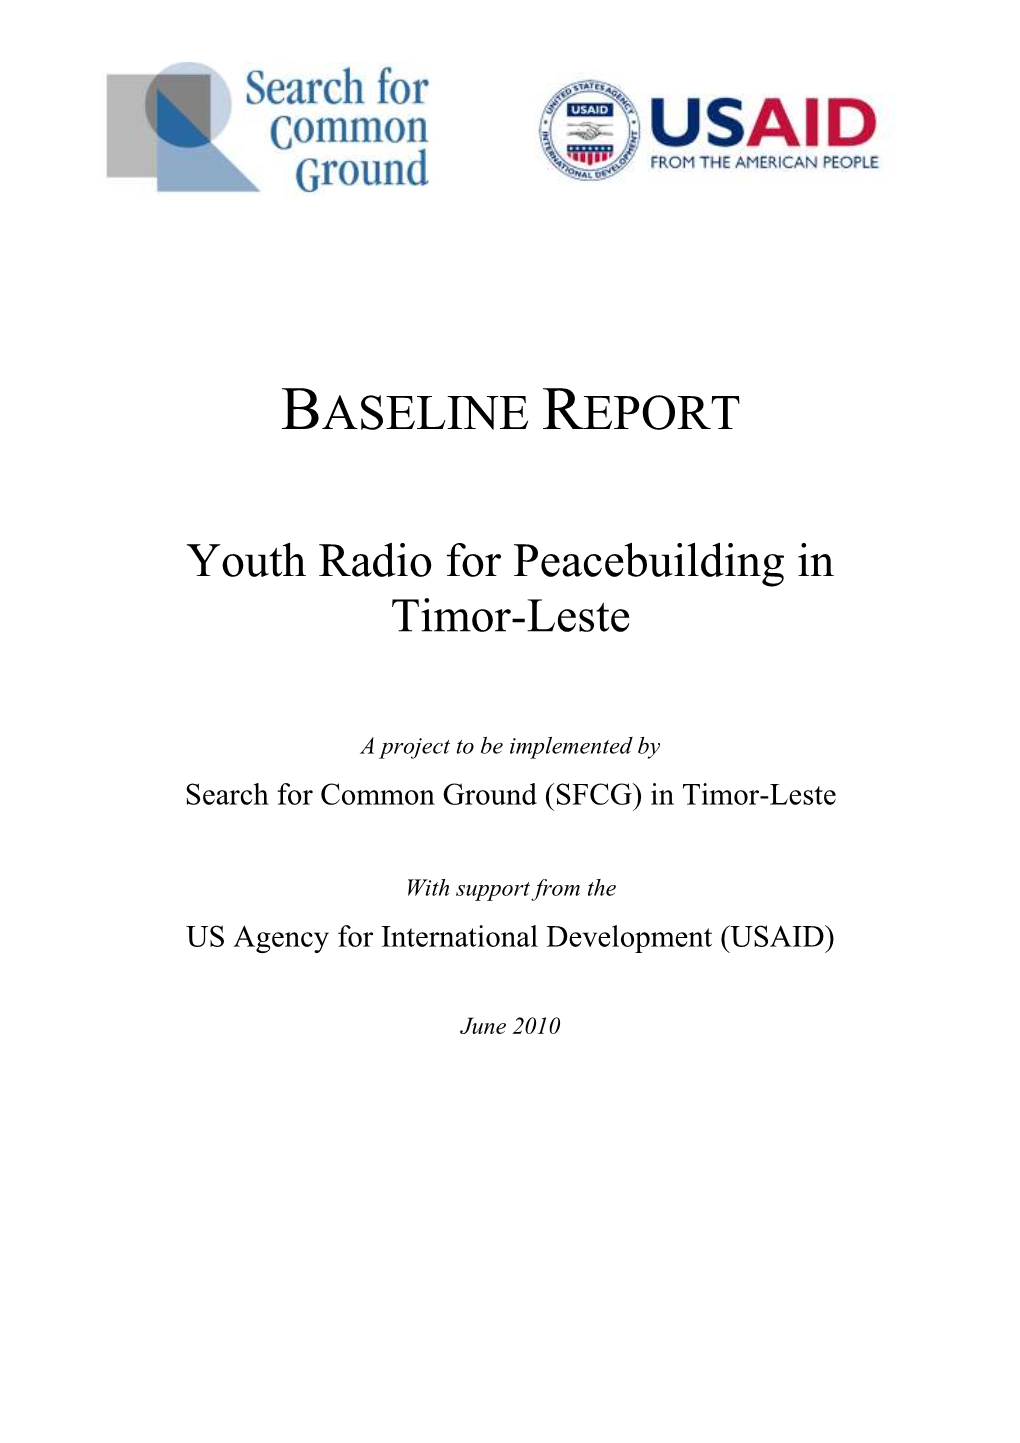 Baseline Report: Youth Radio for Peacebuilding